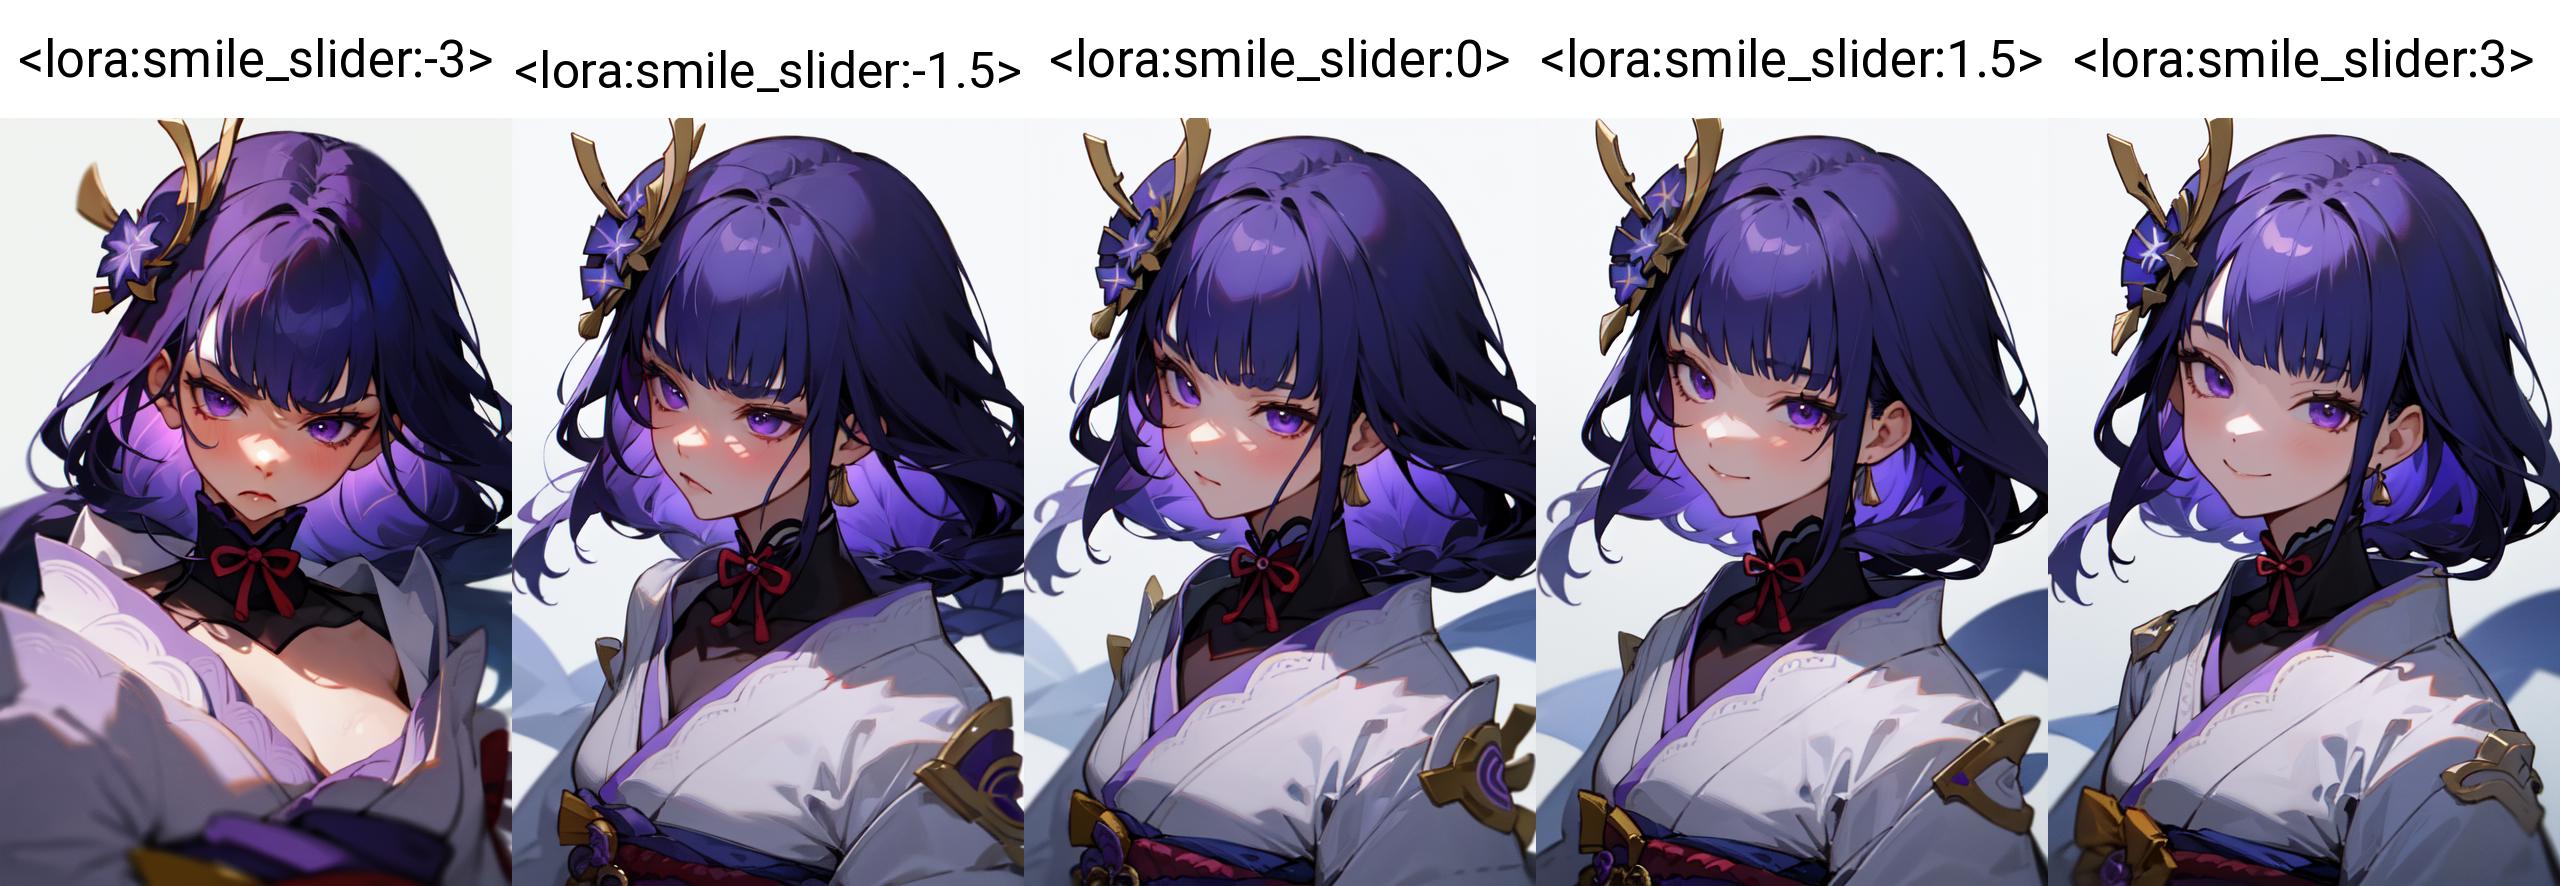 Smiling slider LoRA (for anime models) image by Poiuytrezay